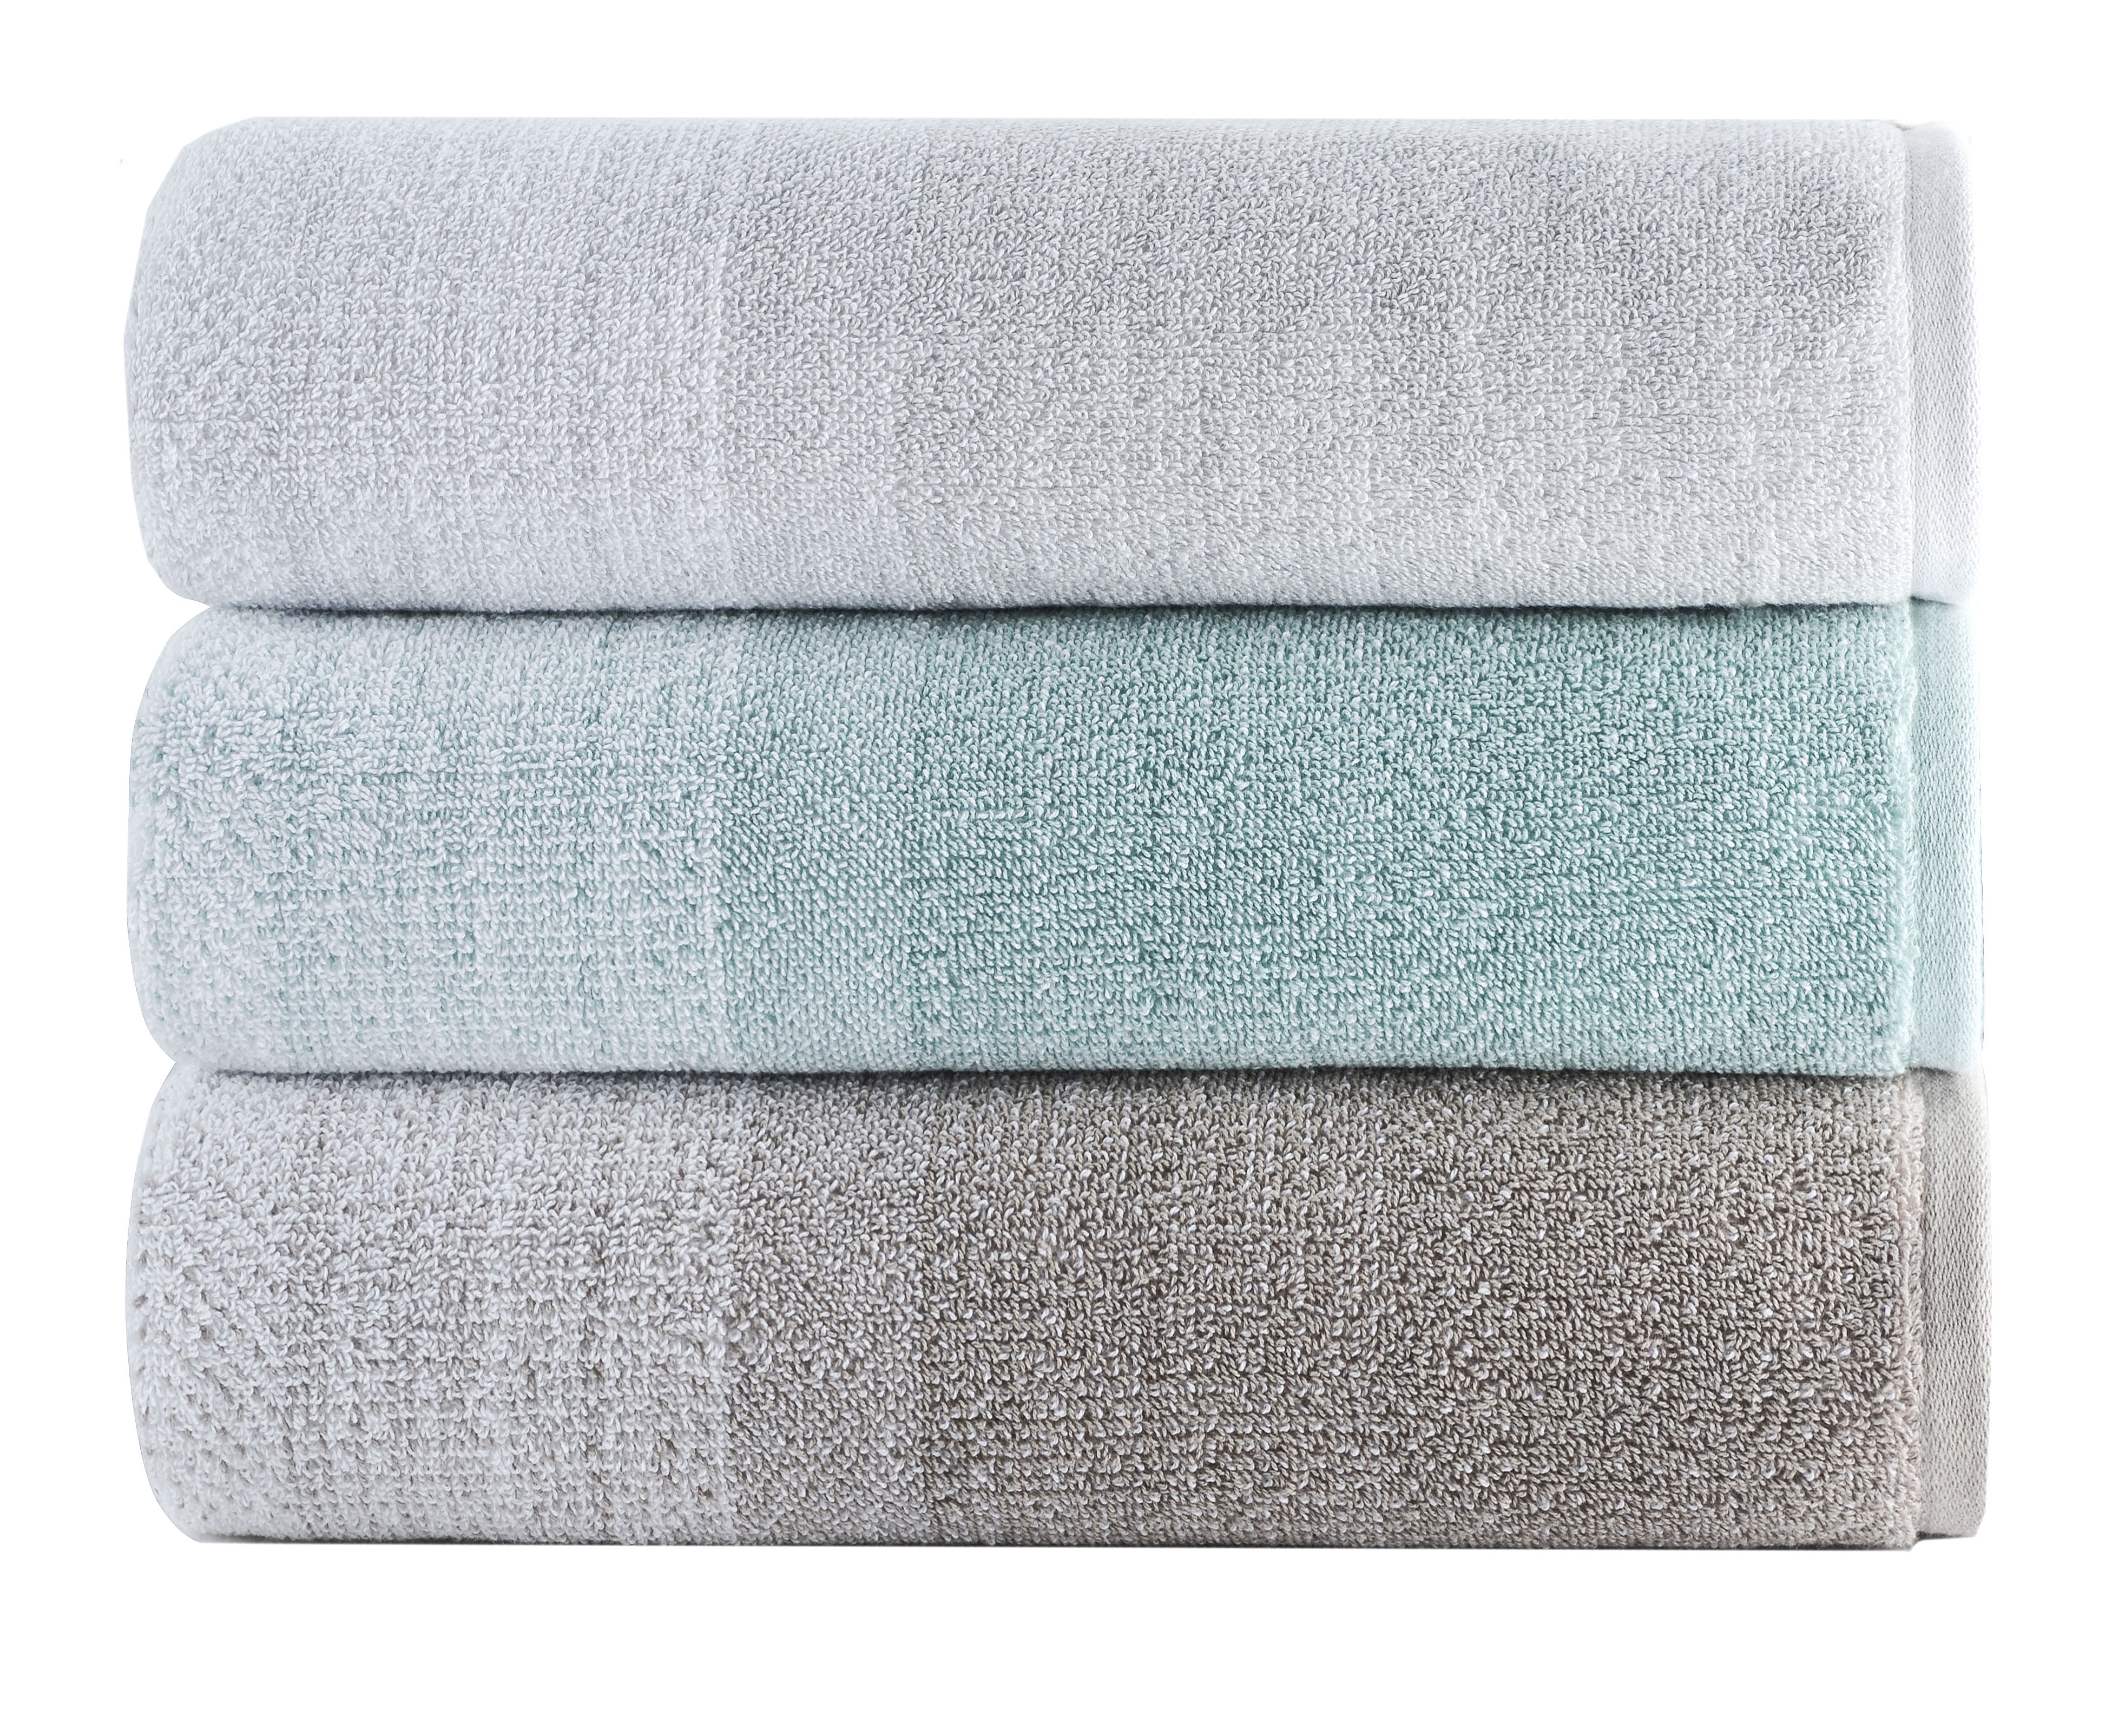 Better Homes Gardens Thick And Plush Heathered Bath Towel